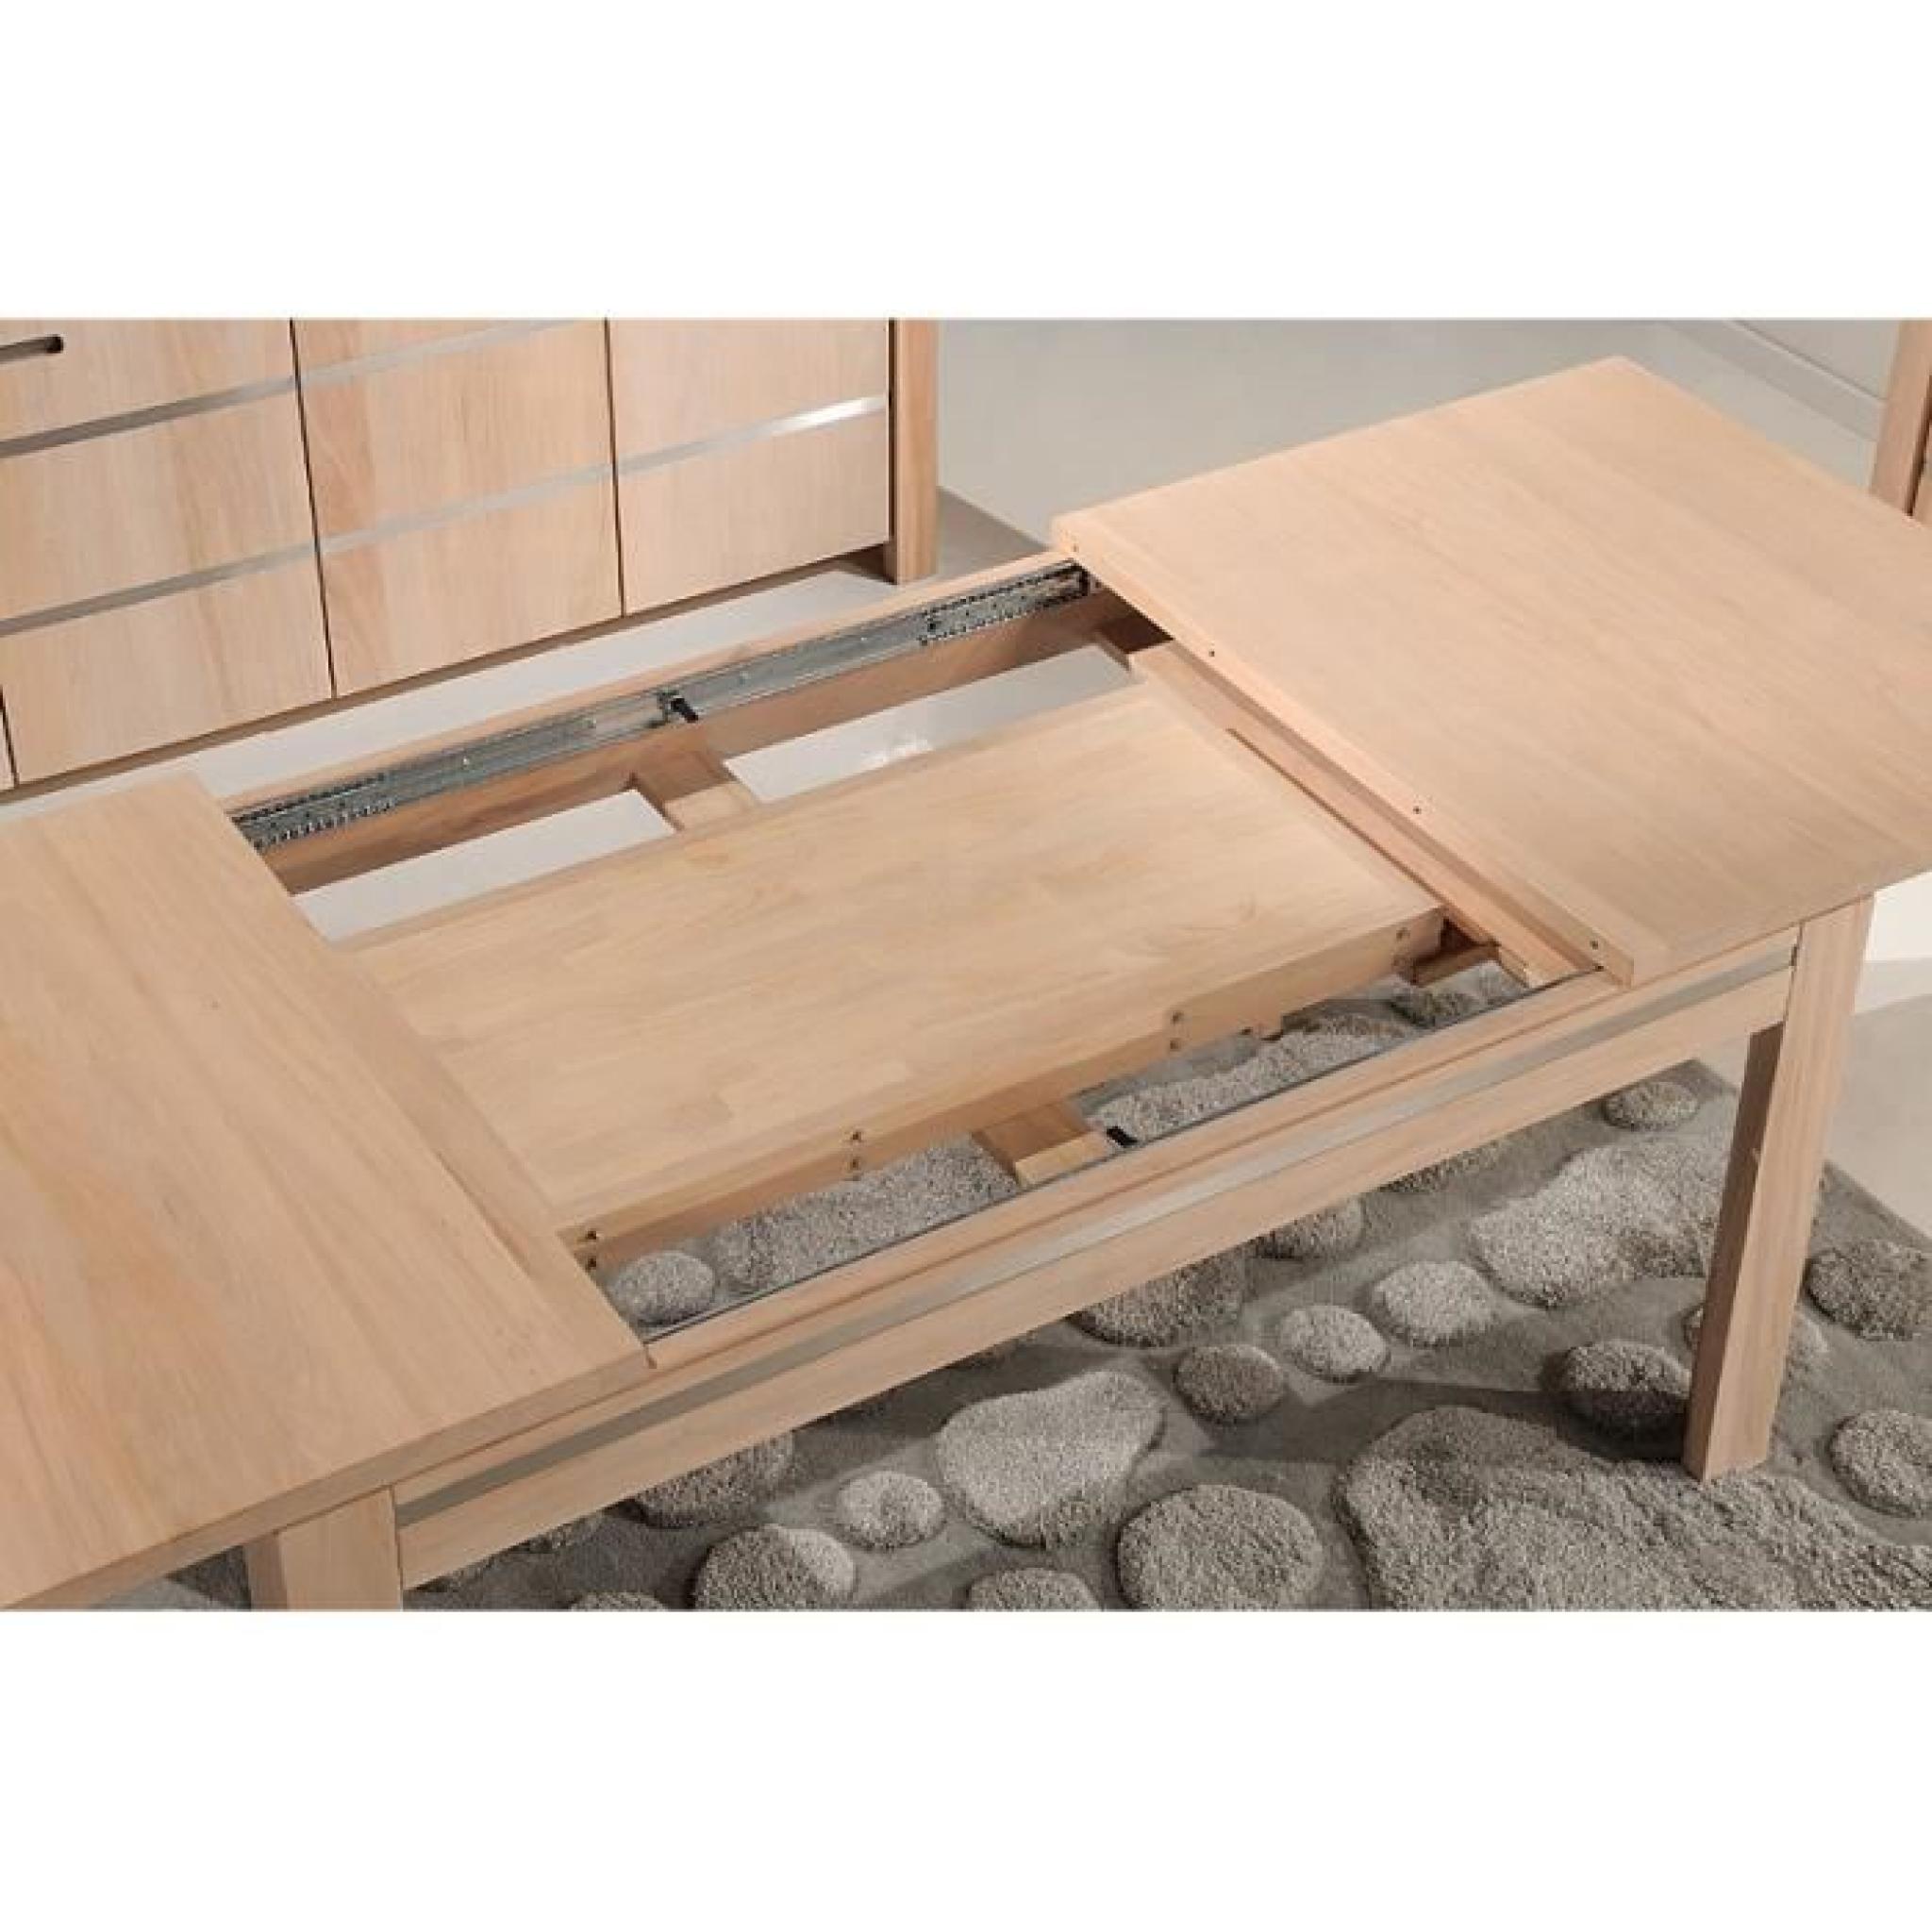 Table OPALE 160/95 ORME MASSIF-INOX (Orme - Taupe) pas cher